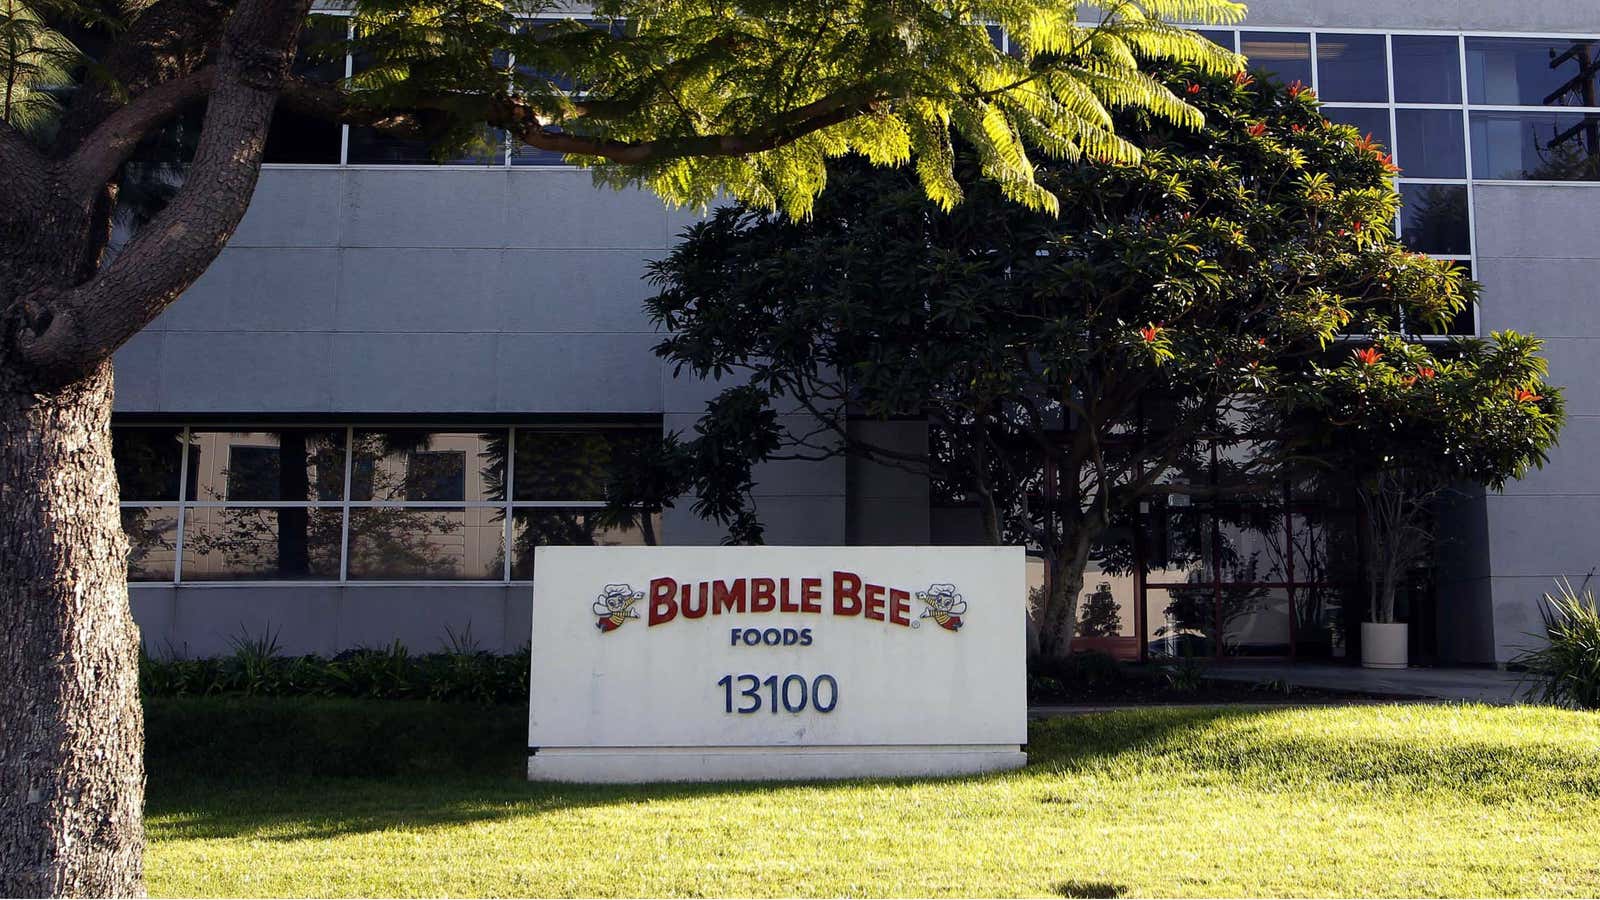 The Bumble Bee Foods death was a tragedy — but perhaps not an isolated incident.